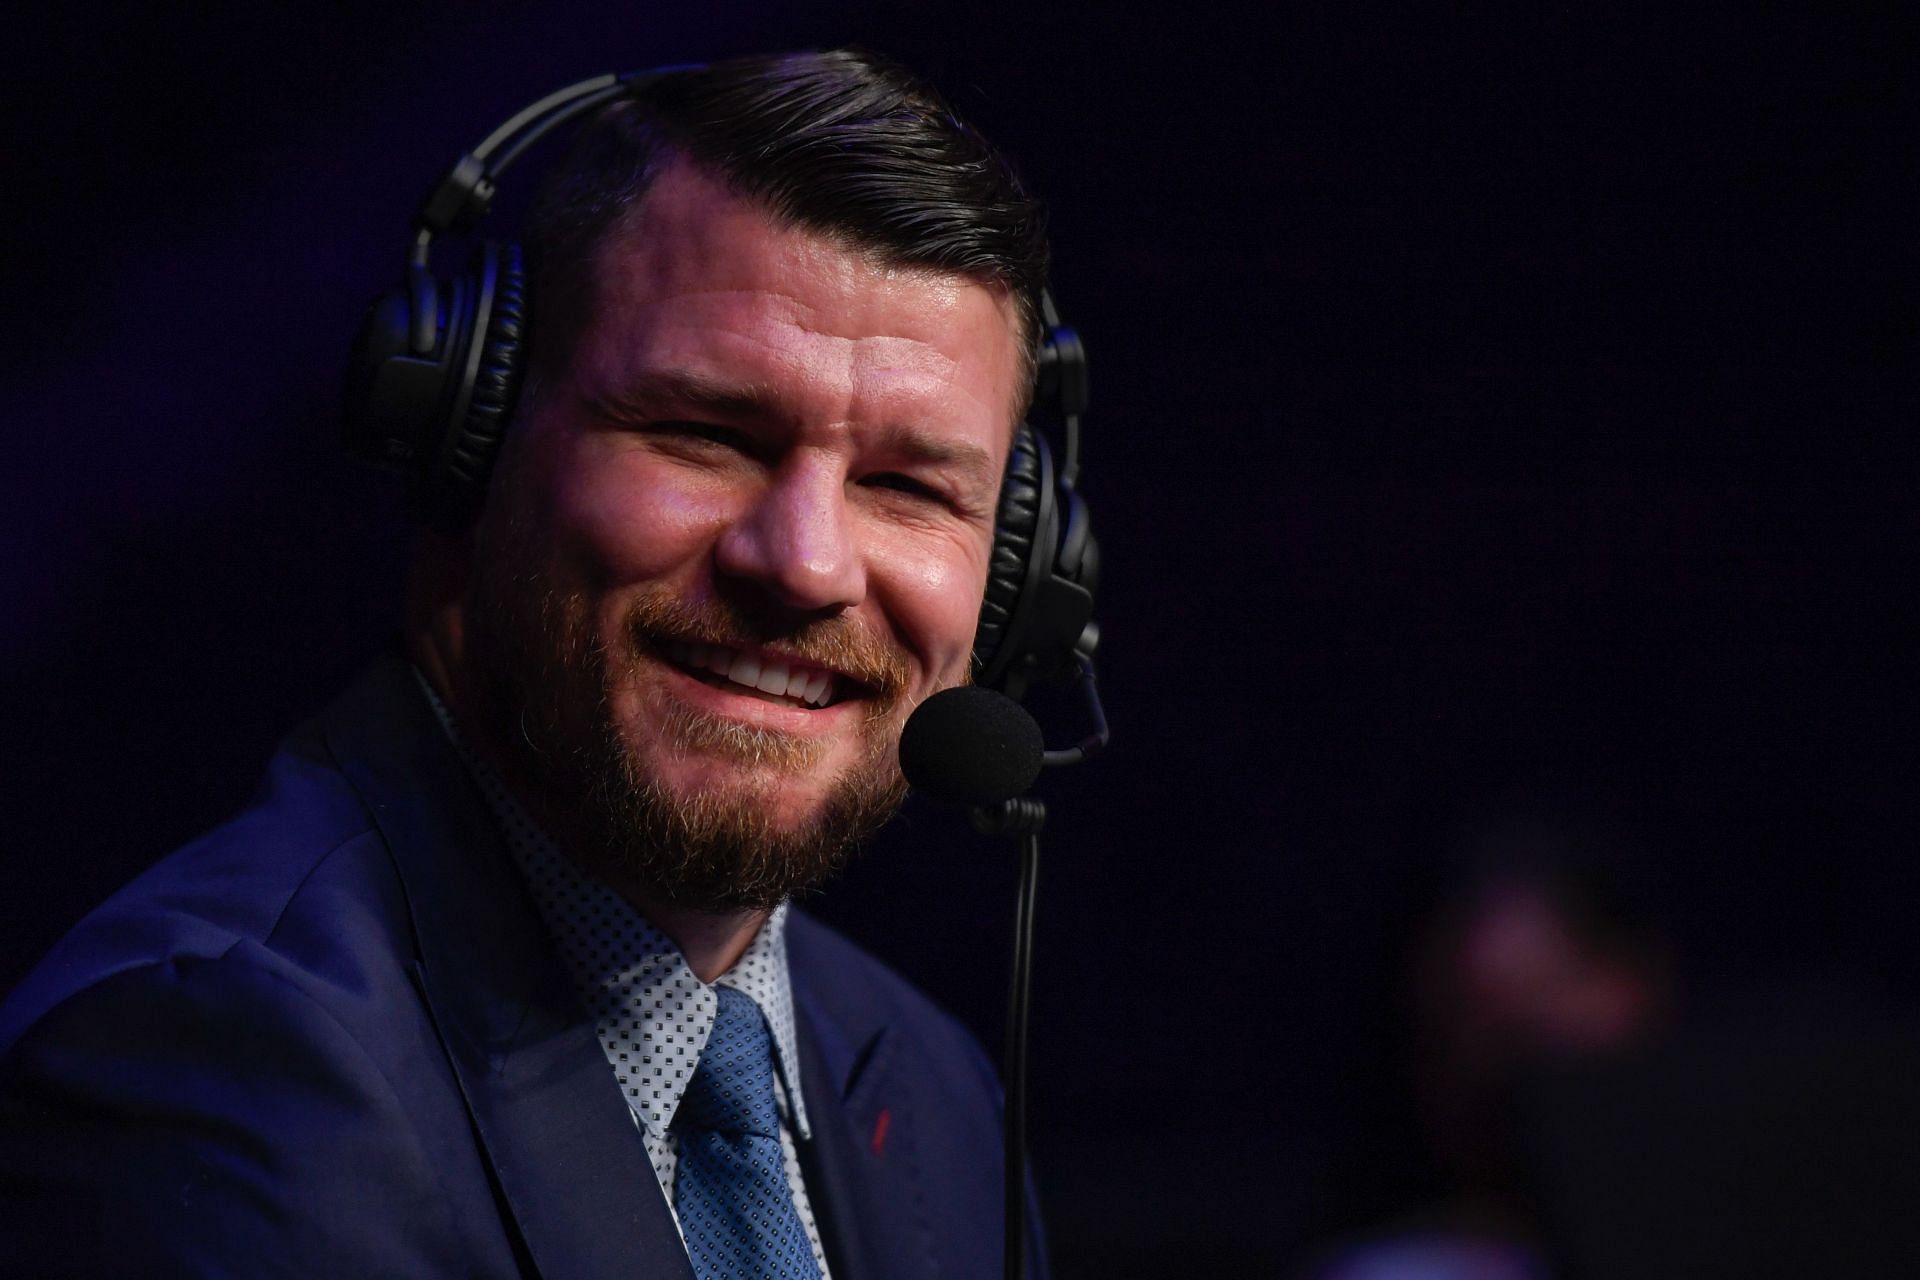 Bisping went 9-3 in the UFC between 2005 and 2010